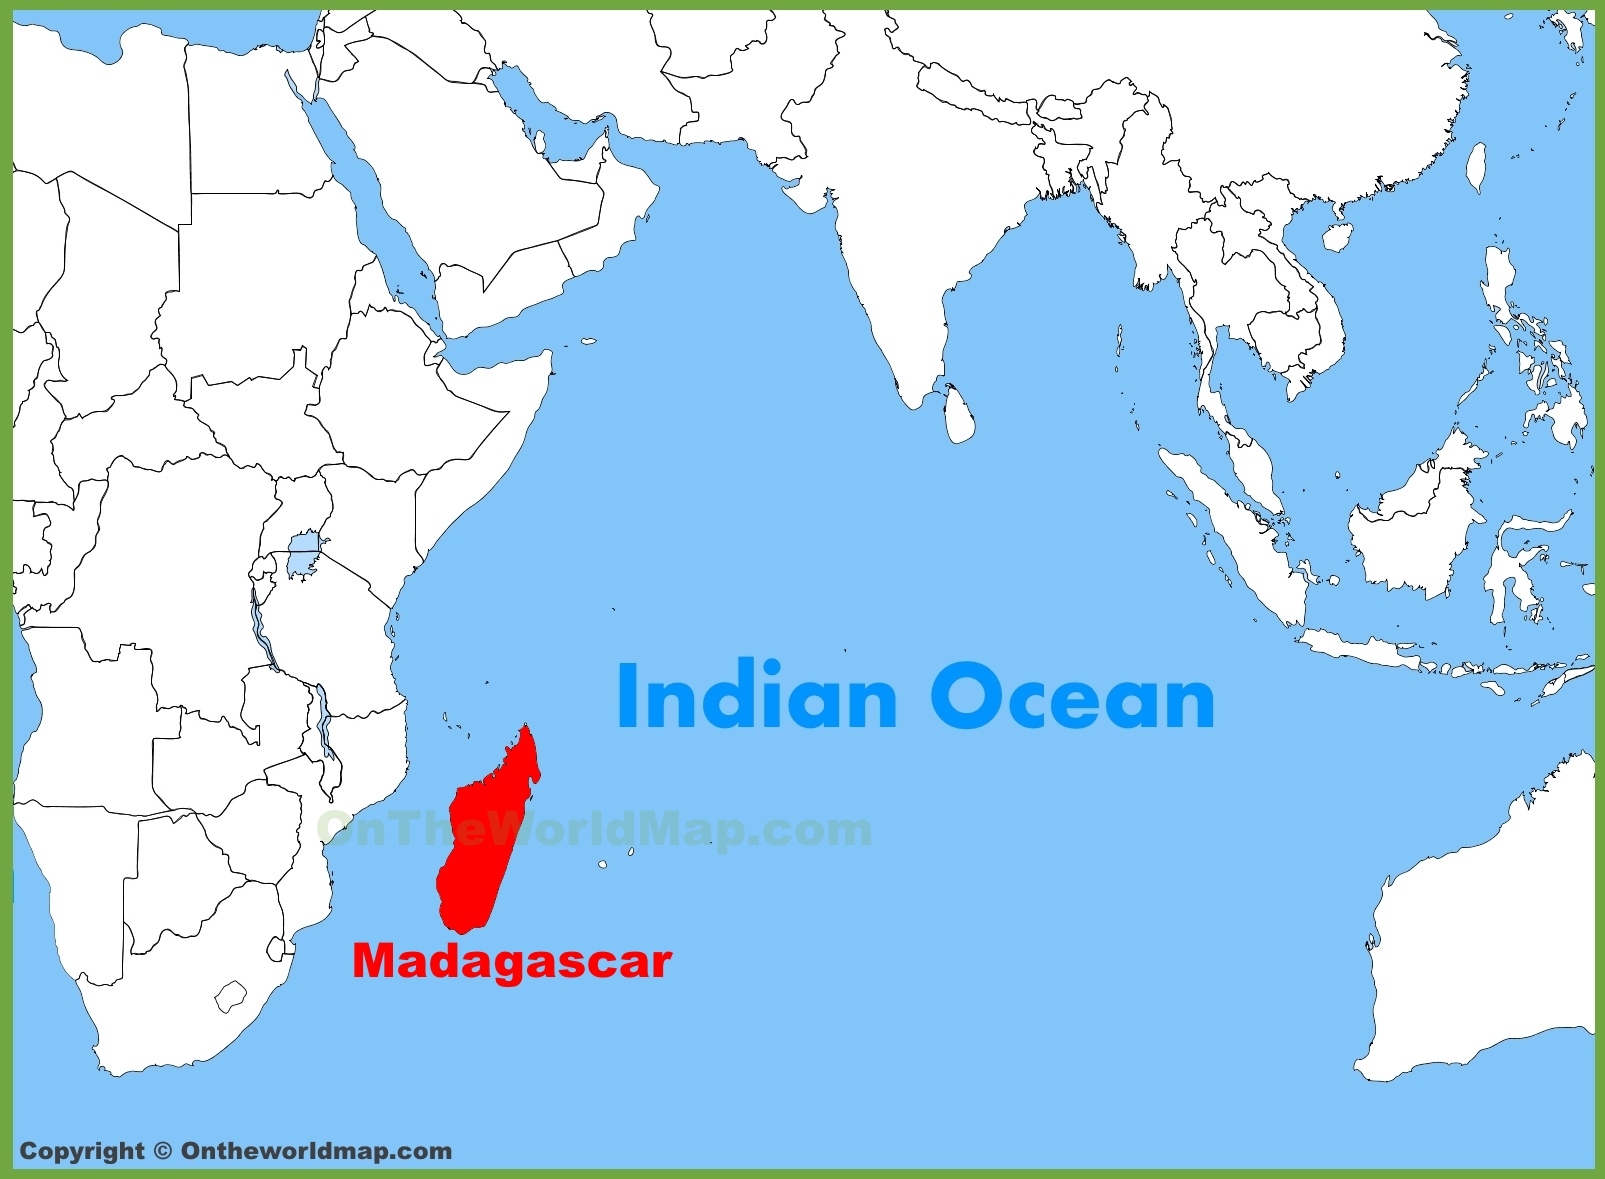 Madagascar Location On The Indian Ocean Map